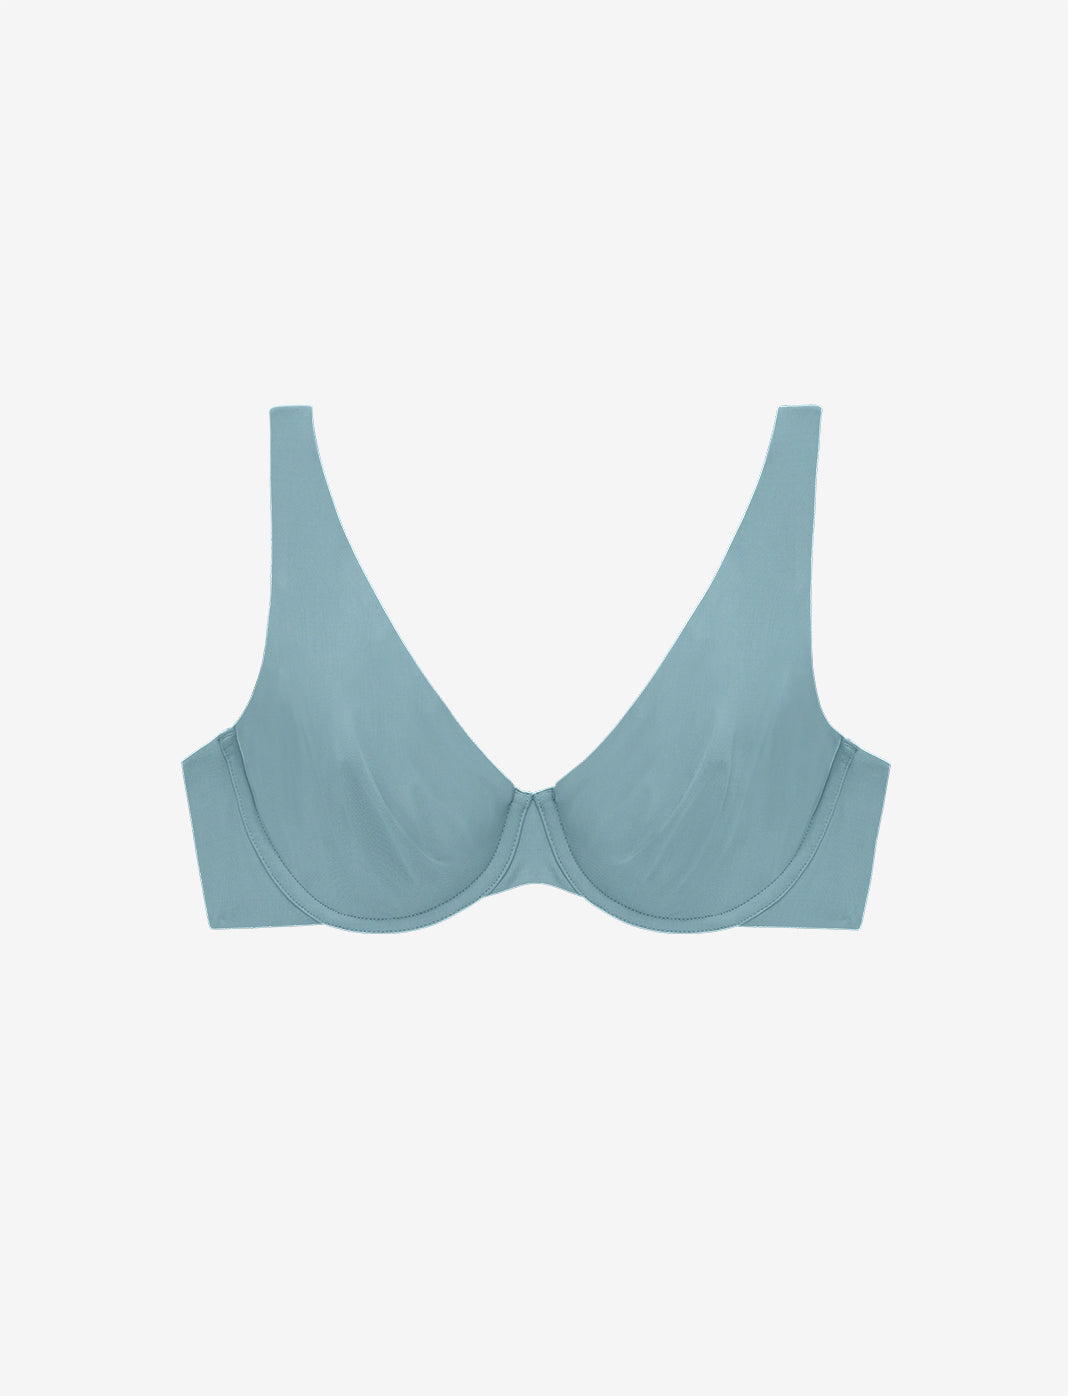 Best Full Coverage Bras - Full Coverage & Supportive Bras for Heavy Busts &  Larger Breasts